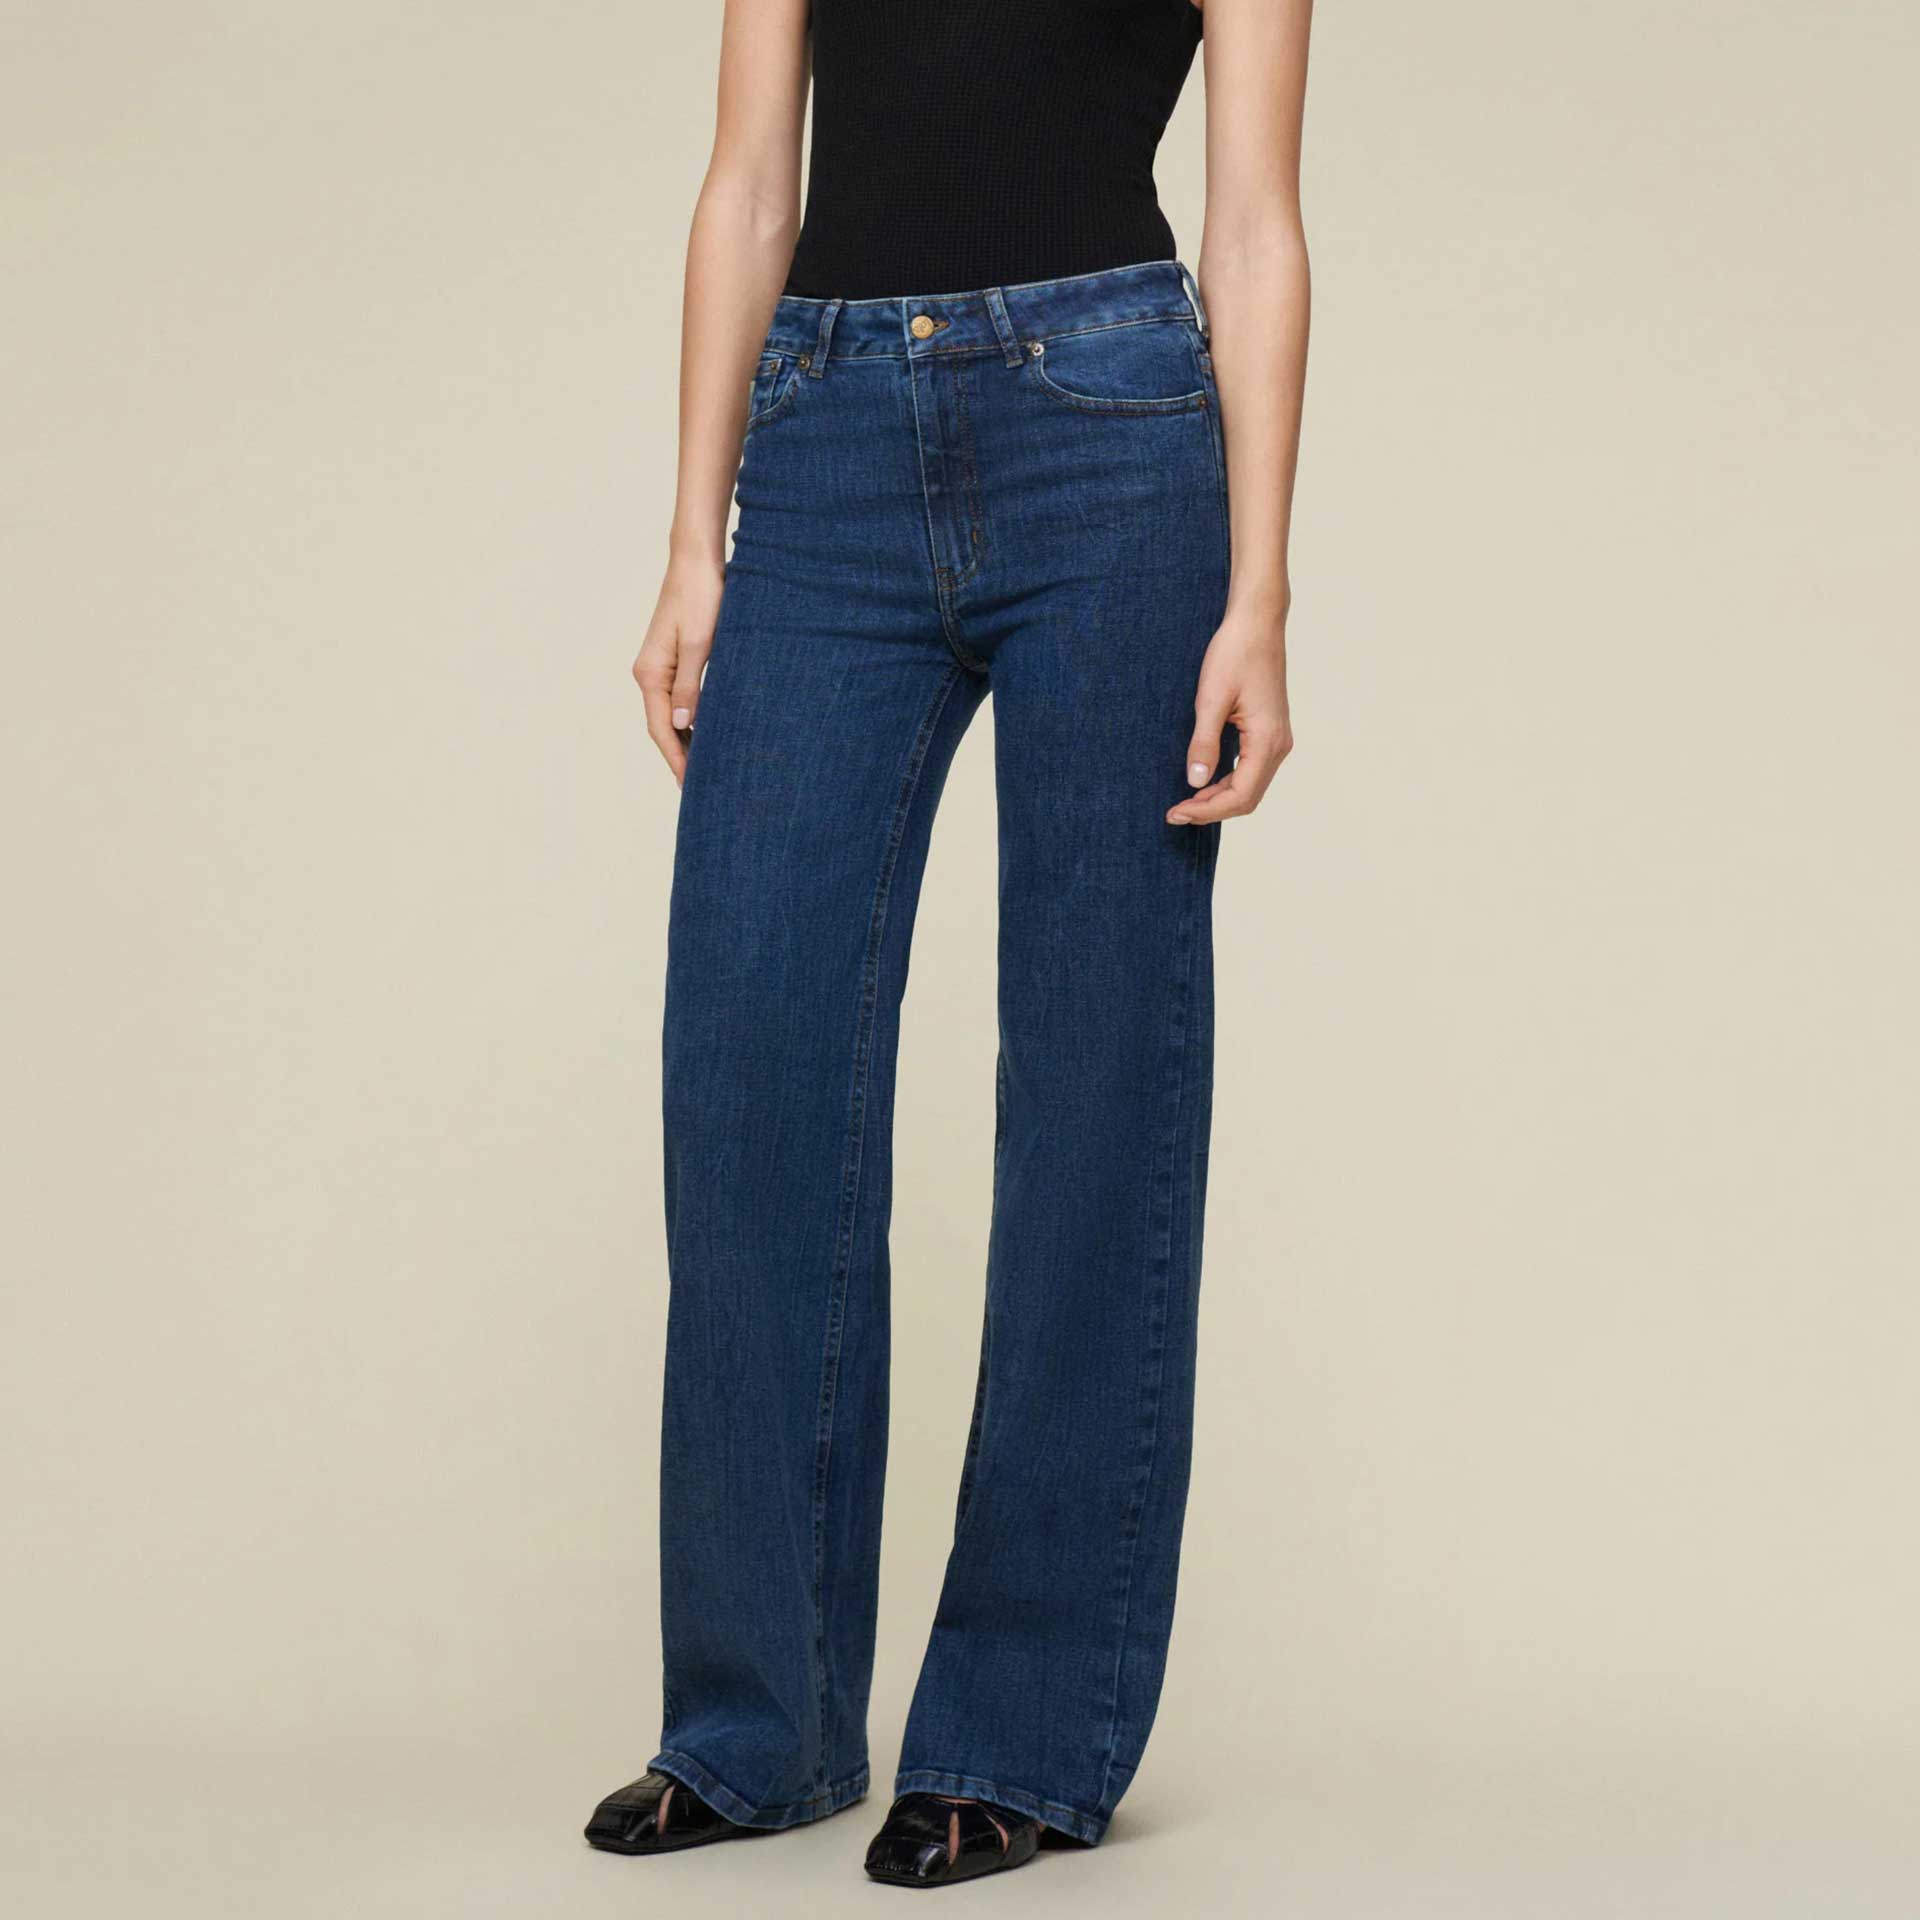 Lois jeans Jeans Palazzo 1